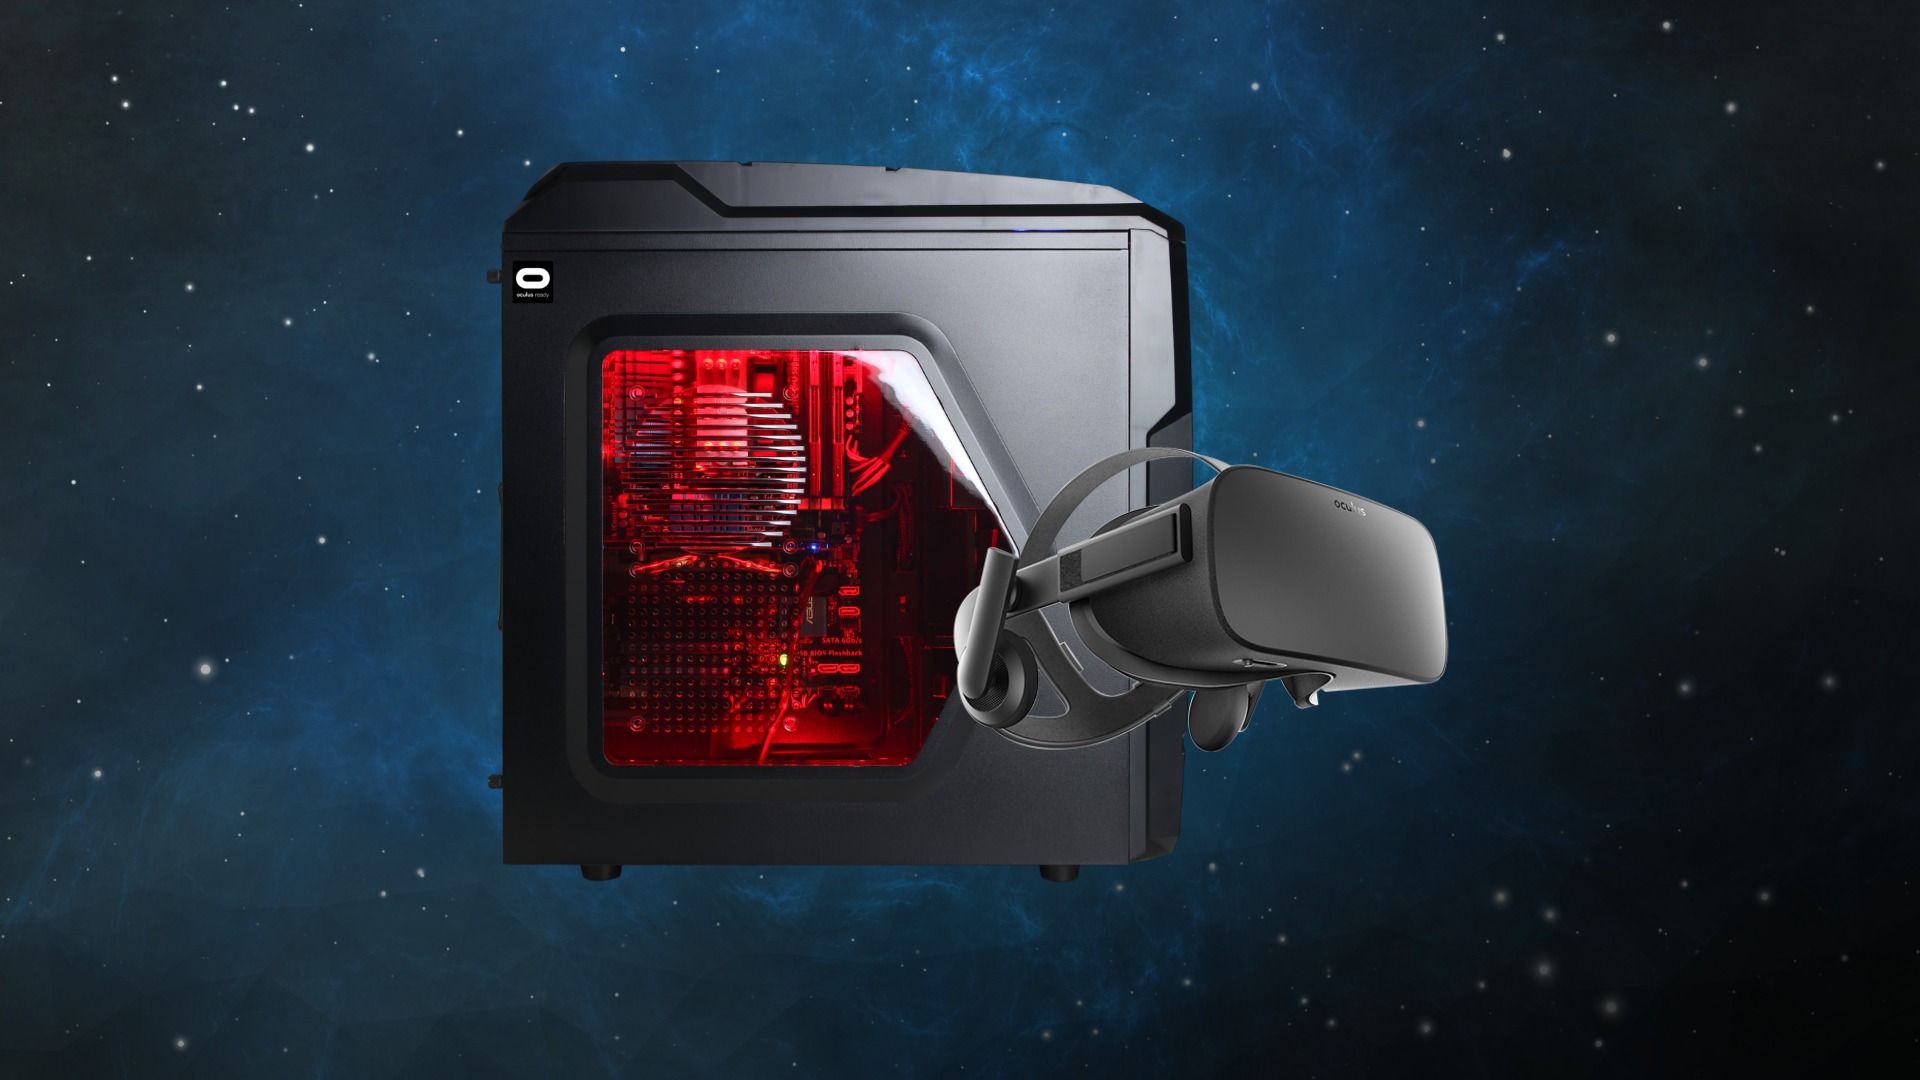 Grav kollision Stedord This Oculus Ready PC Costs $500 When Bundled with Rift – Road to VR